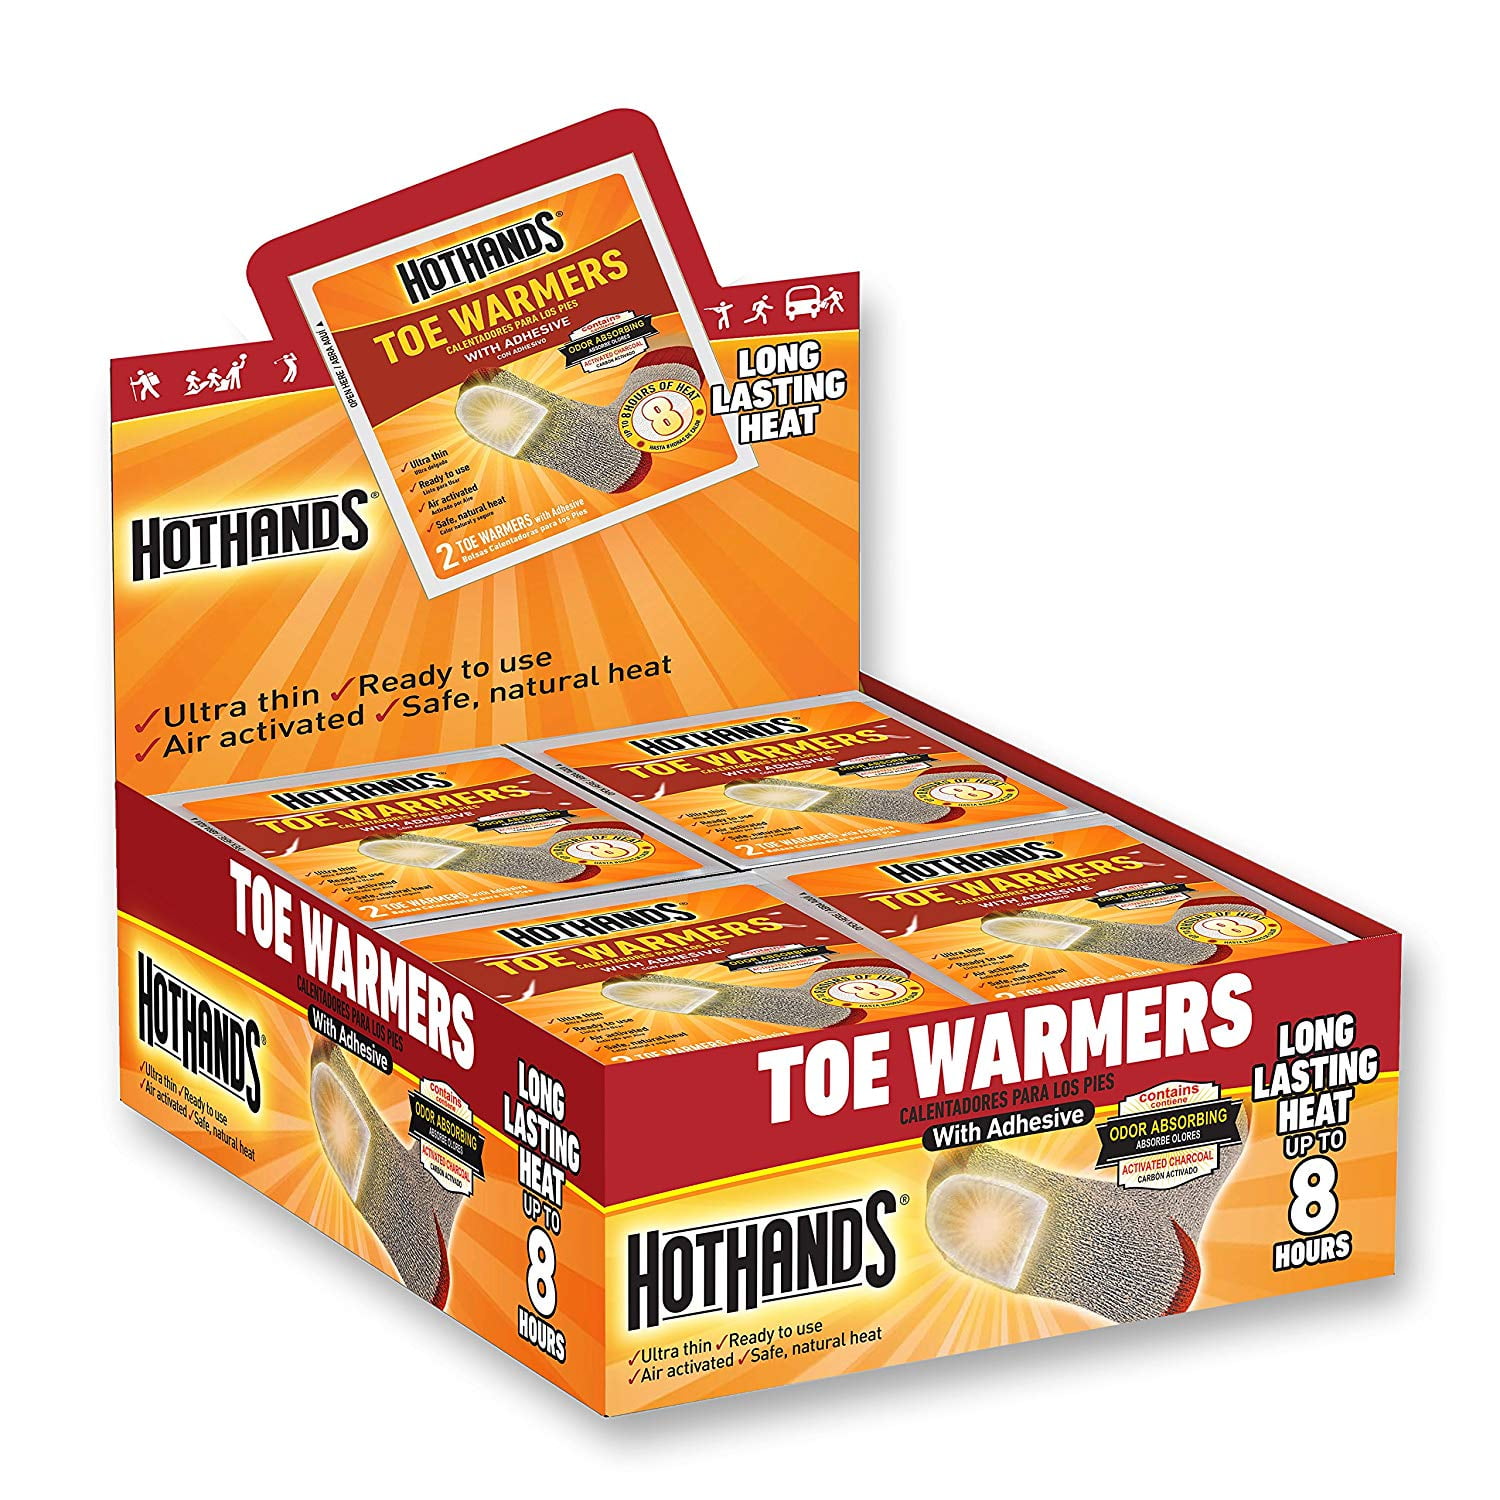 Lot Of 3 Hothands Toe Warmer Value Pack 7 Pair 8 Hrs Heat Per Pair 21 Total Pair